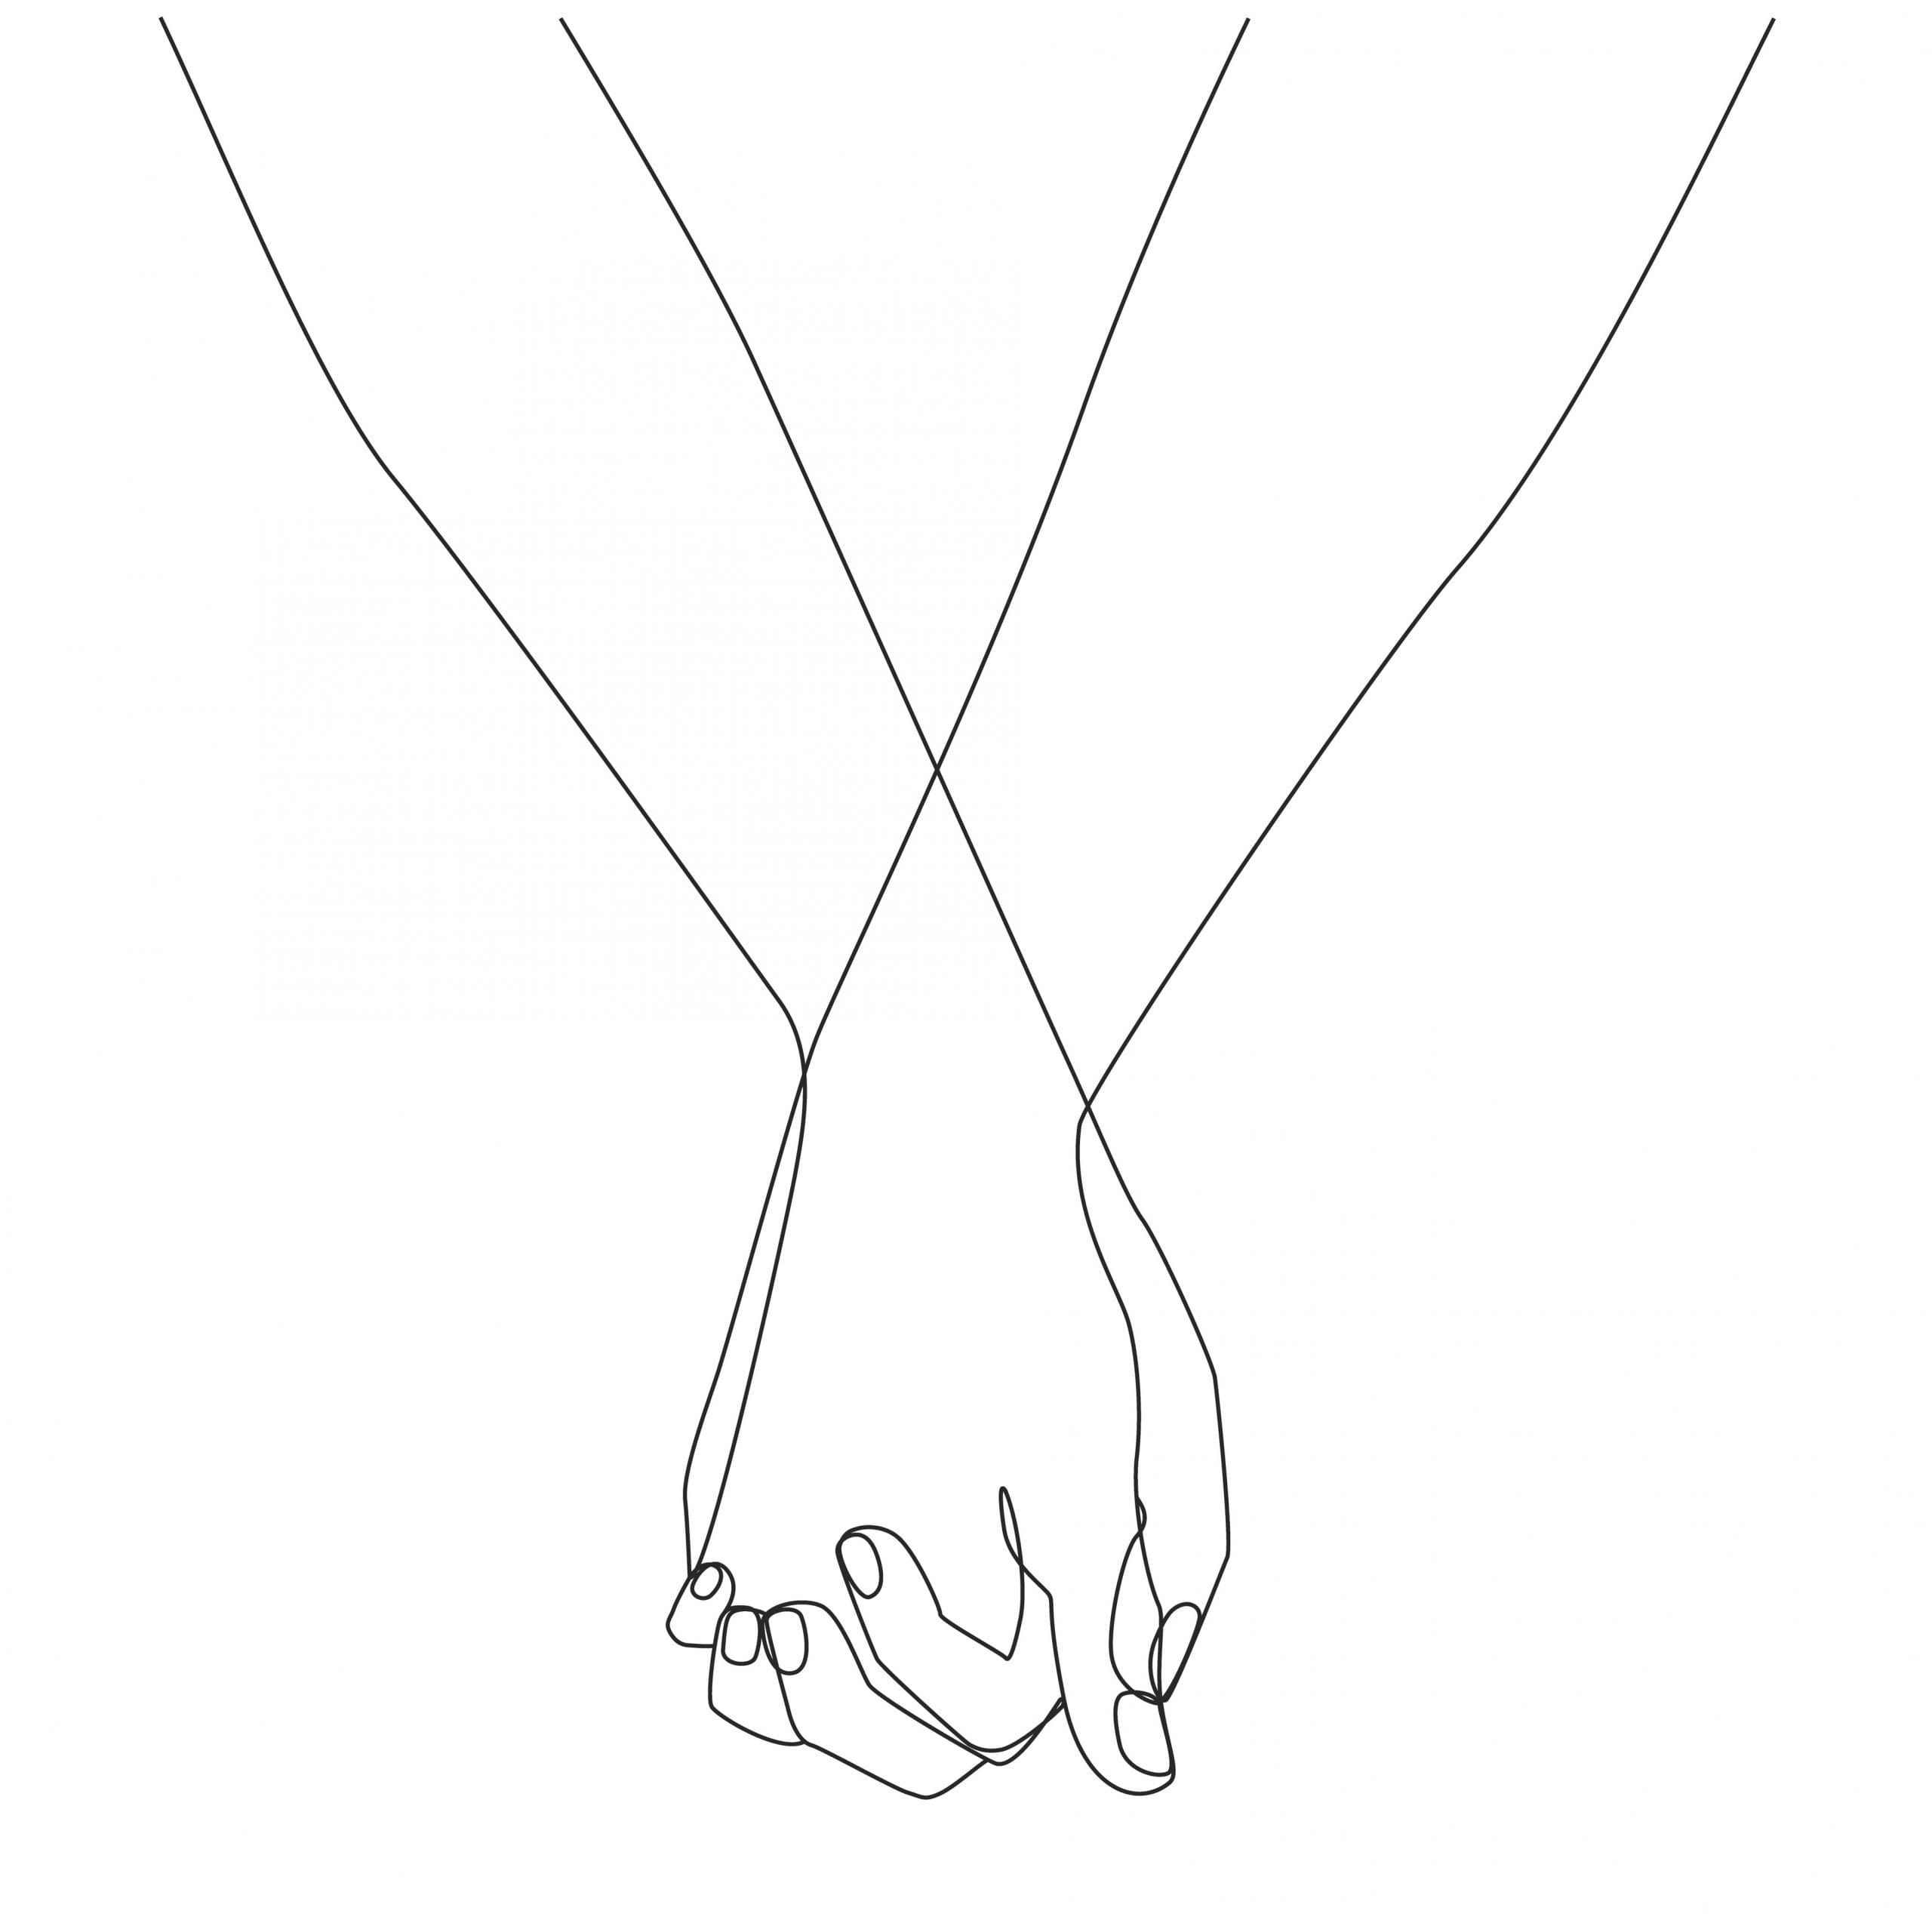 Green tea: An illustration of a couple holding hands